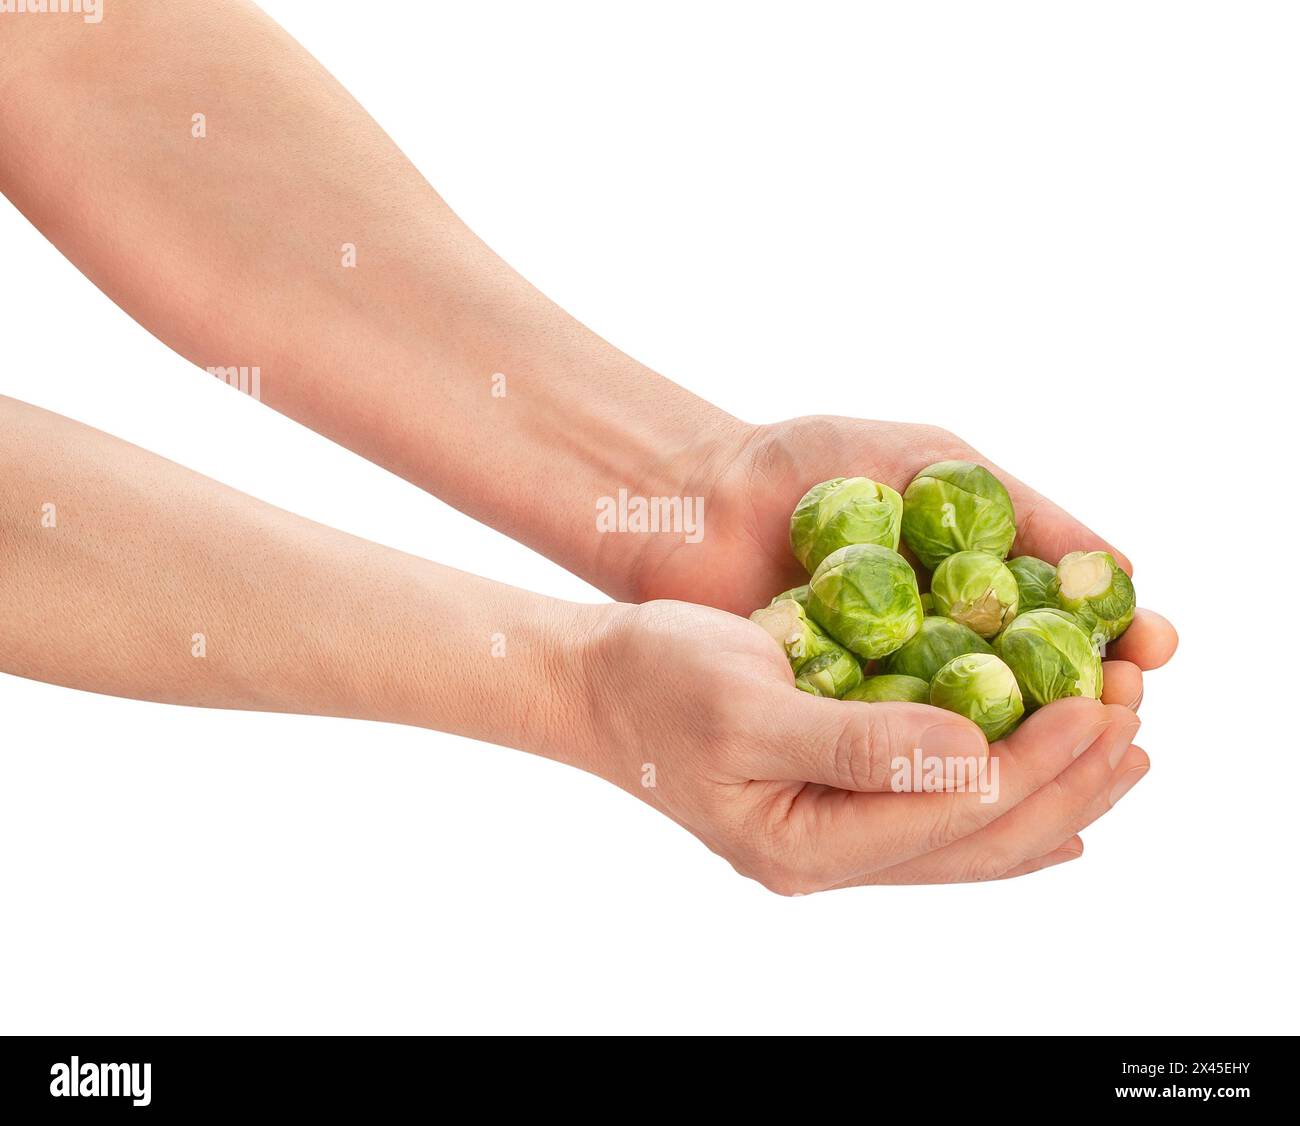 brussels sprouts in hand path isolated on white Stock Photo